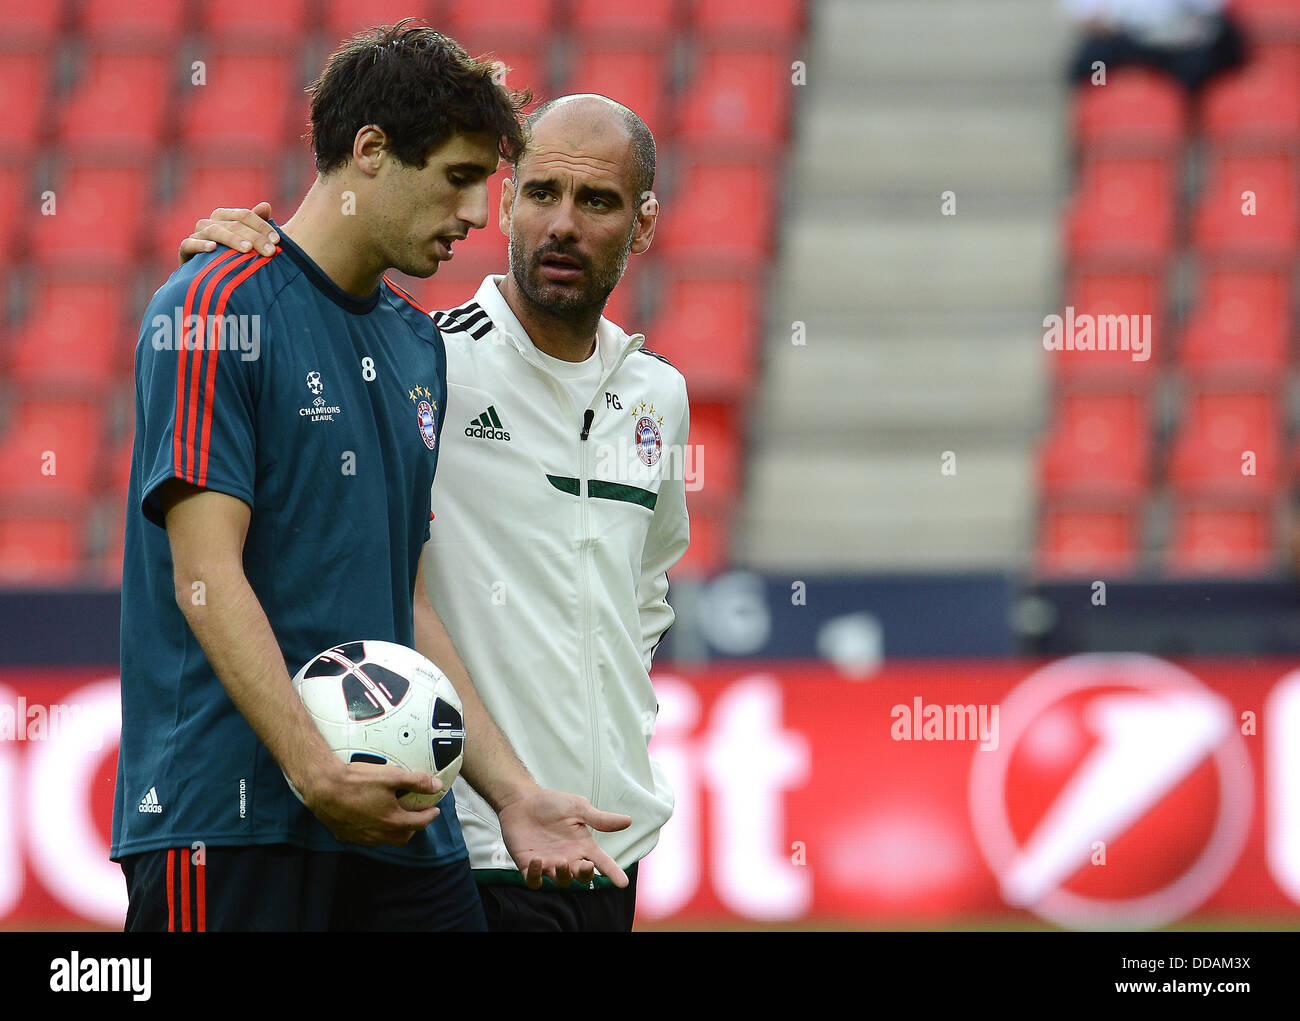 Prague, Czech Republic. 29th Aug, 2013. Coach of FC Bayern Munich Pep Guardiola, right, and Javi Martinez pictured during the training session in Prague, Czech Republic, on Thursday, August 29, 2013. FC Bayern Munich faces FC Chelsea in Super Cup soccer match on Friday August 30. Credit:  Katerina Sulova/CTK Photo/Alamy Live News Stock Photo